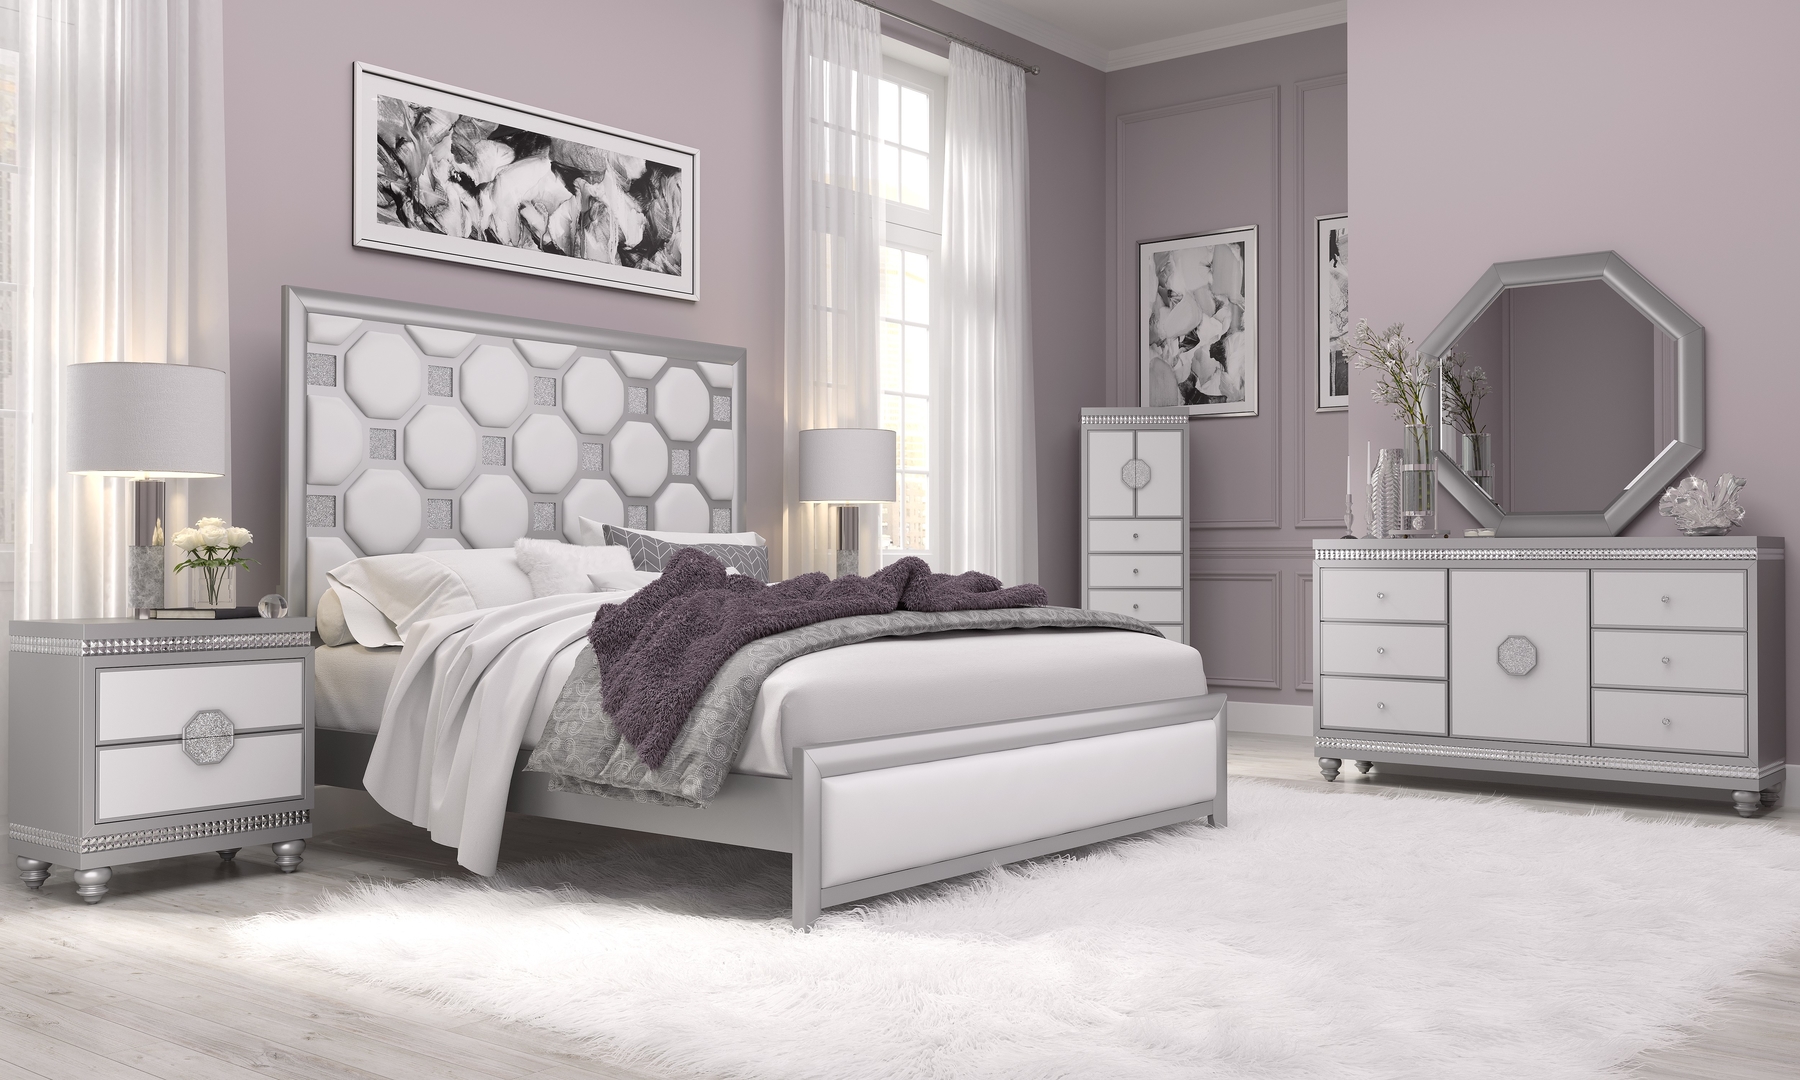 Kylie Queen Size Bed kylie Global Furniture USA Modern Beds | Comfyco ...